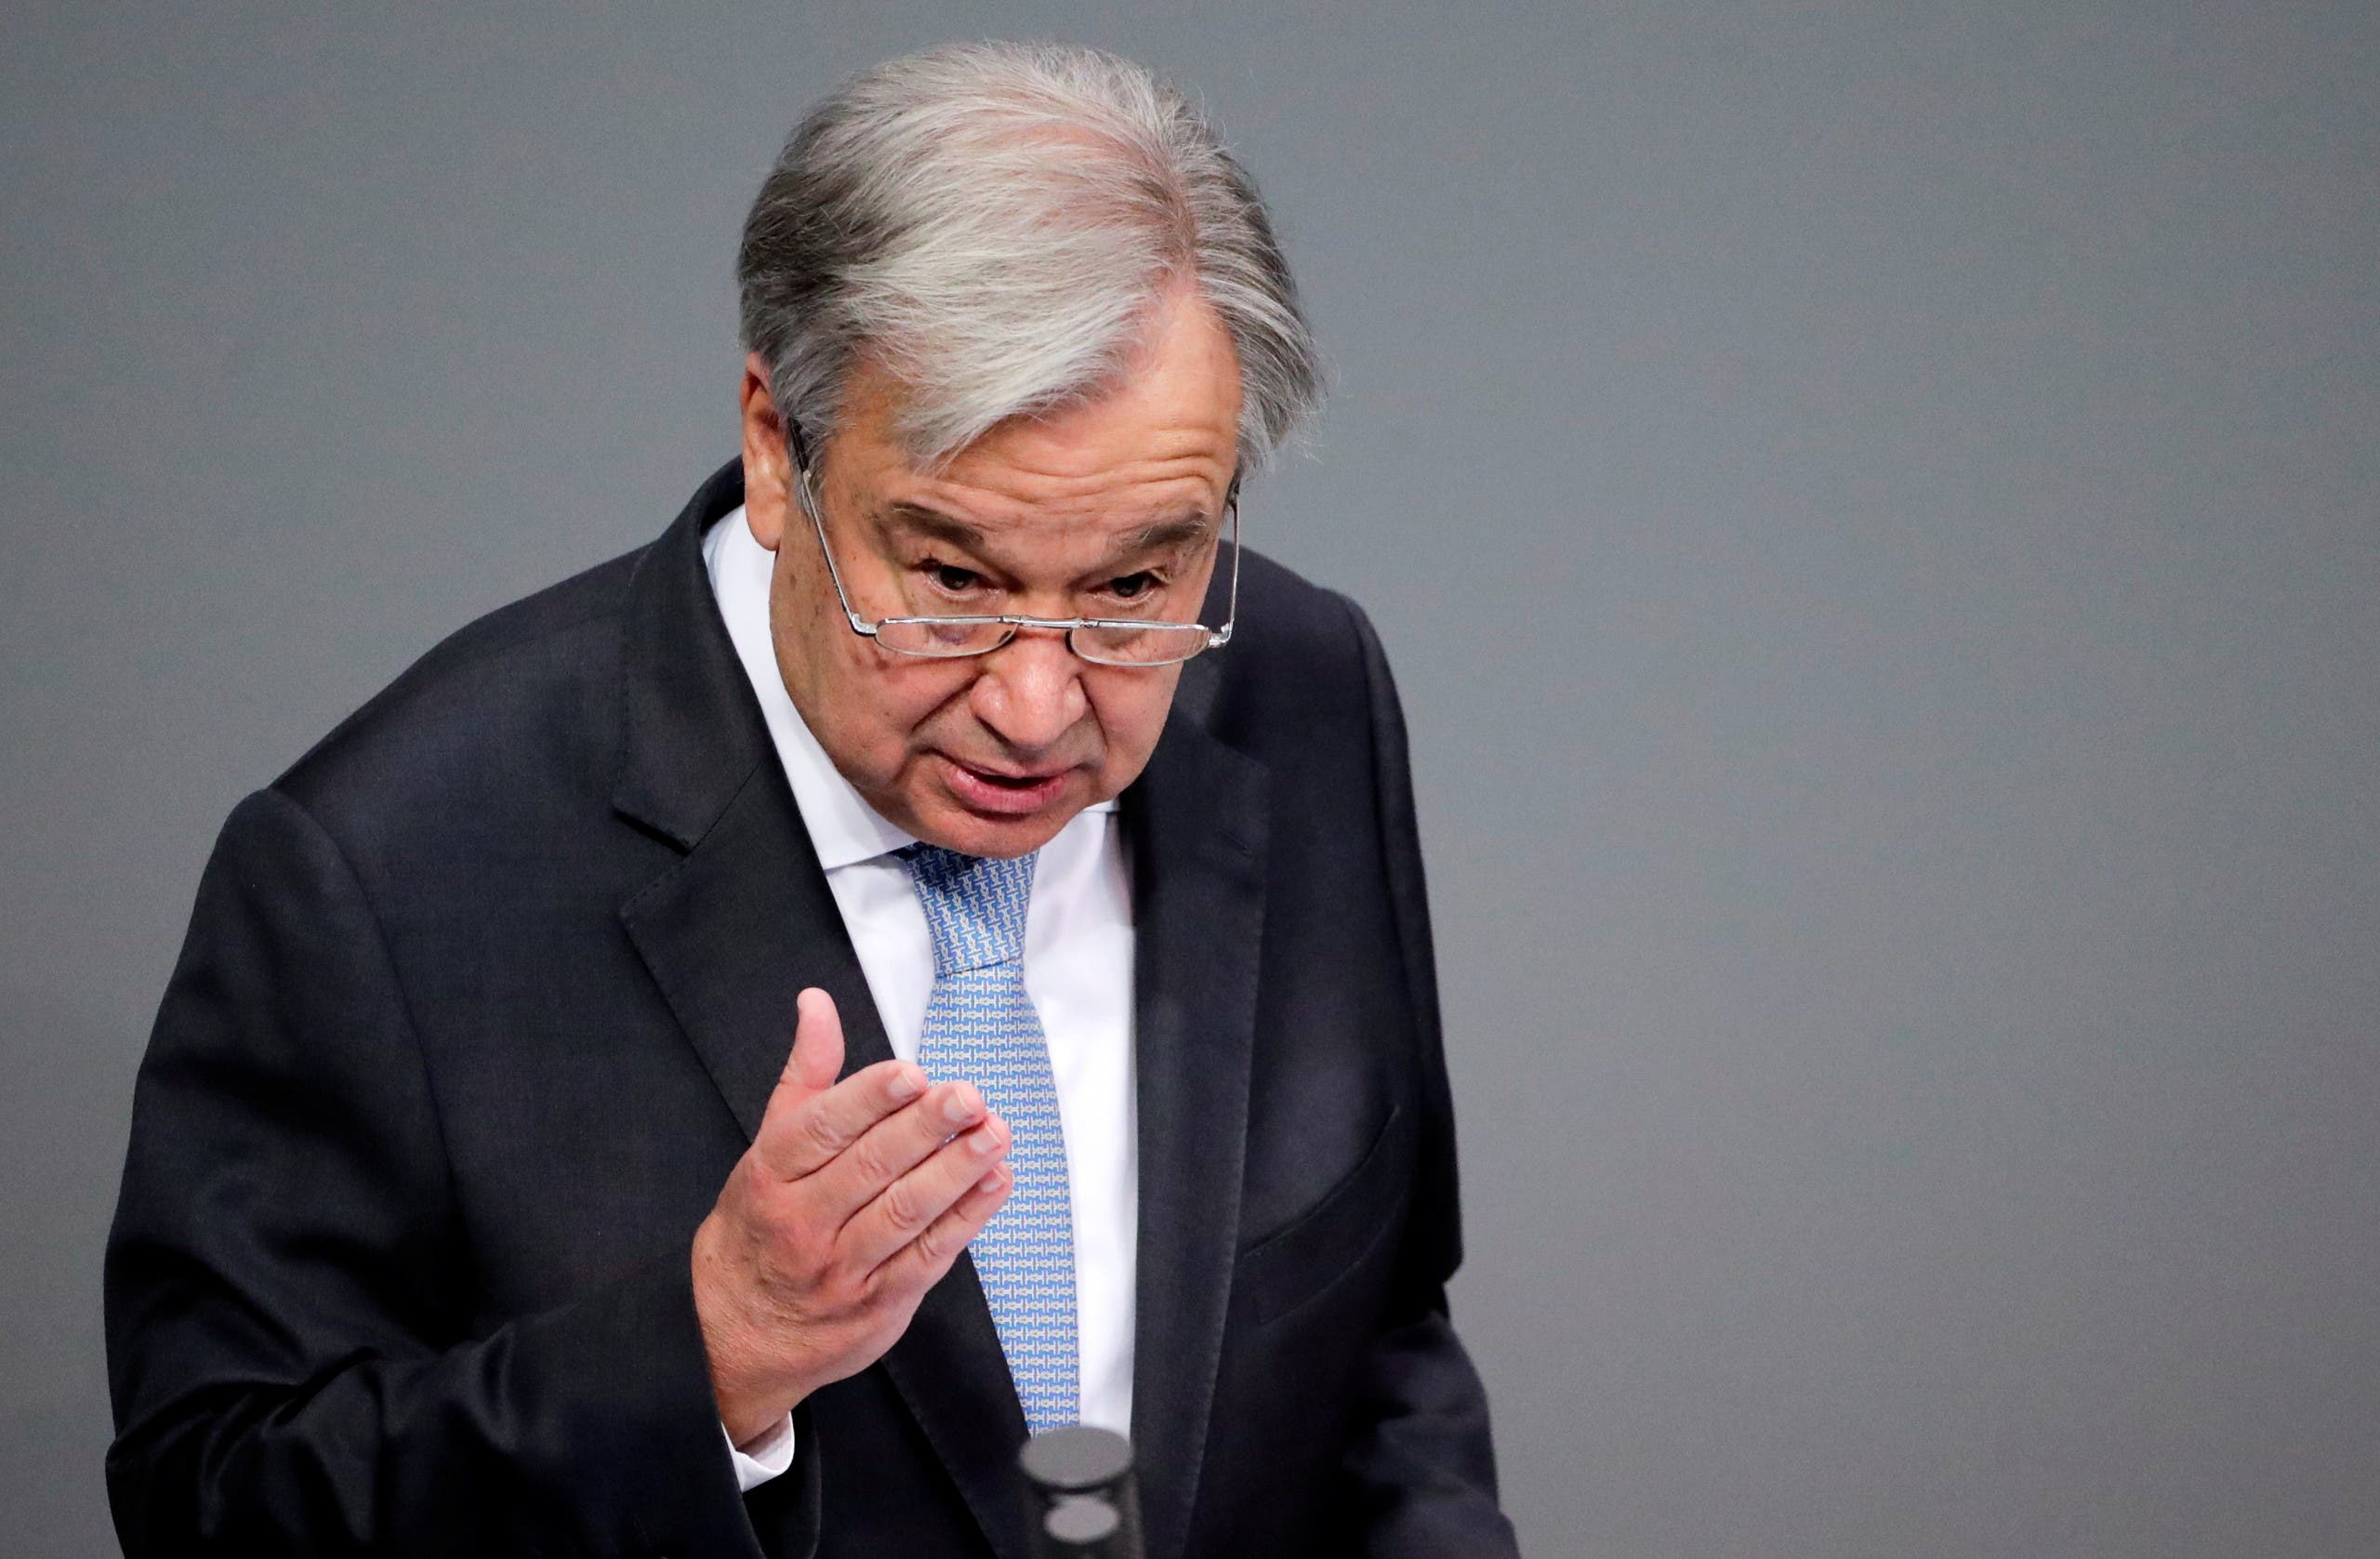 United Nations Secretary-General Antonio Guterres delivers a speech at the lower house of parliament Bundestag in Berlin, Germany, December 18, 2020. (Reuters)